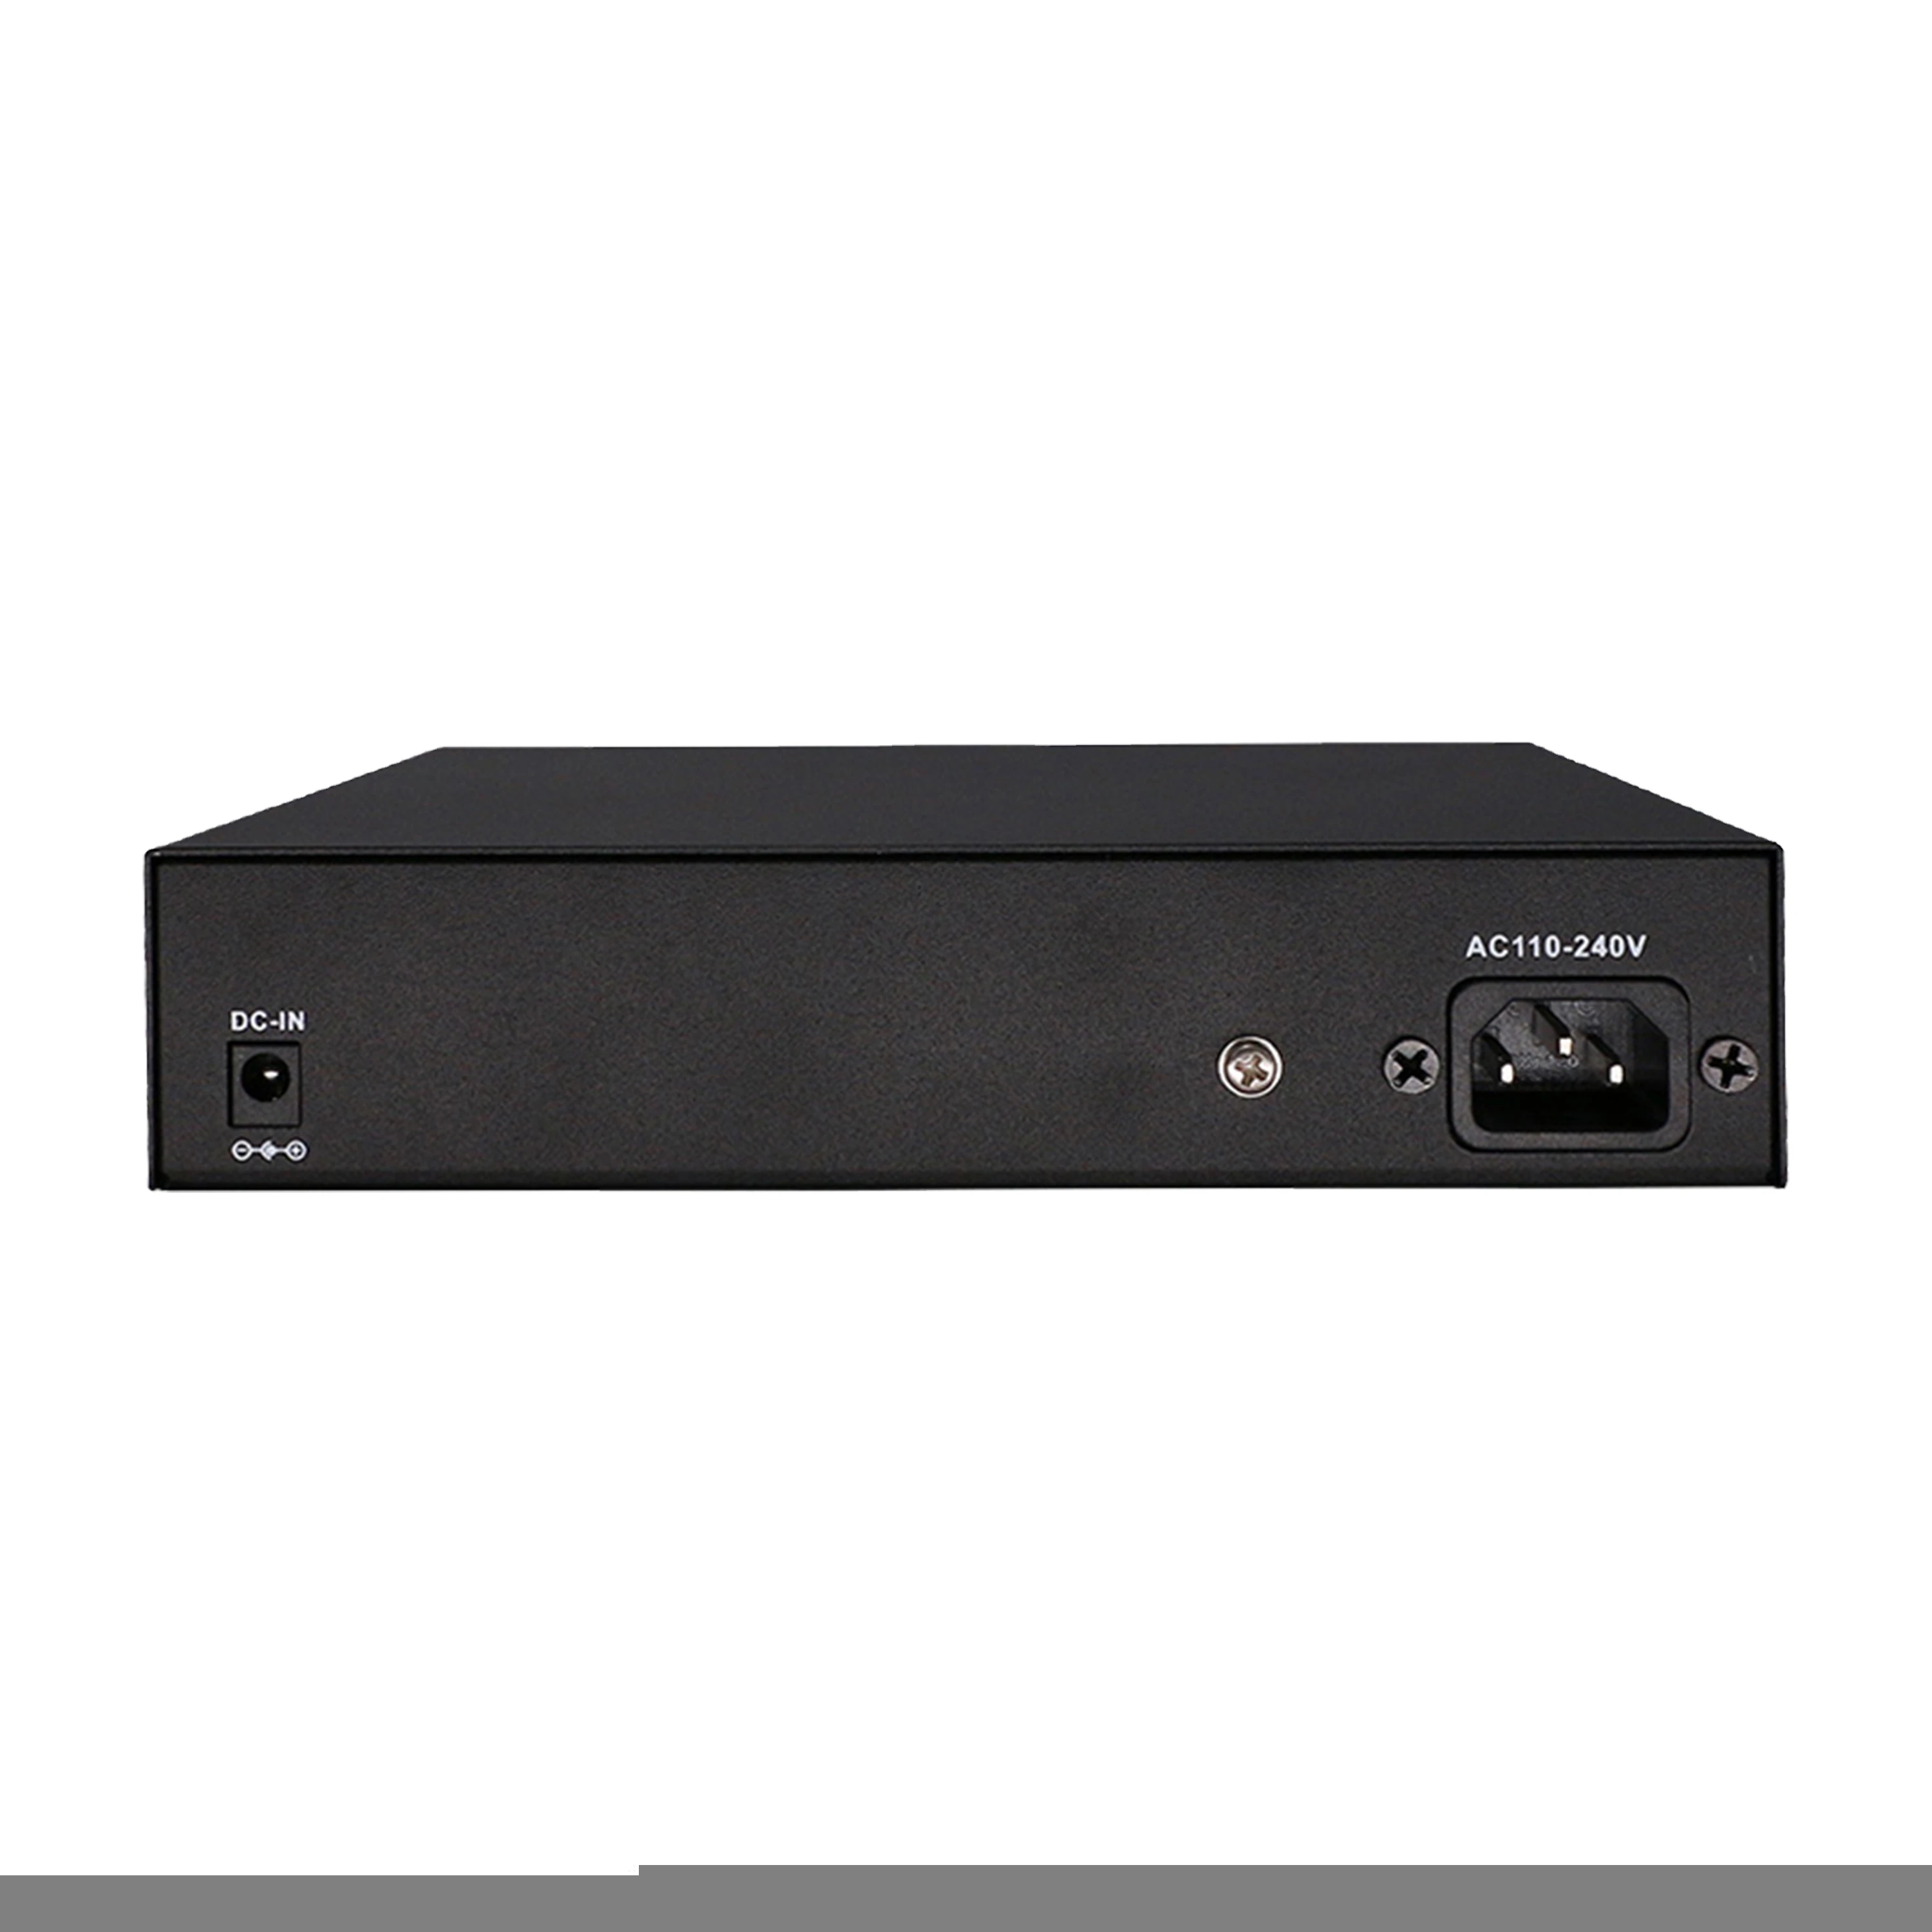 8 Port PoE Switch with sfp 2 uplink port Gigabit Network Switch Supports Auto Power Supply Active and Passive PD Device